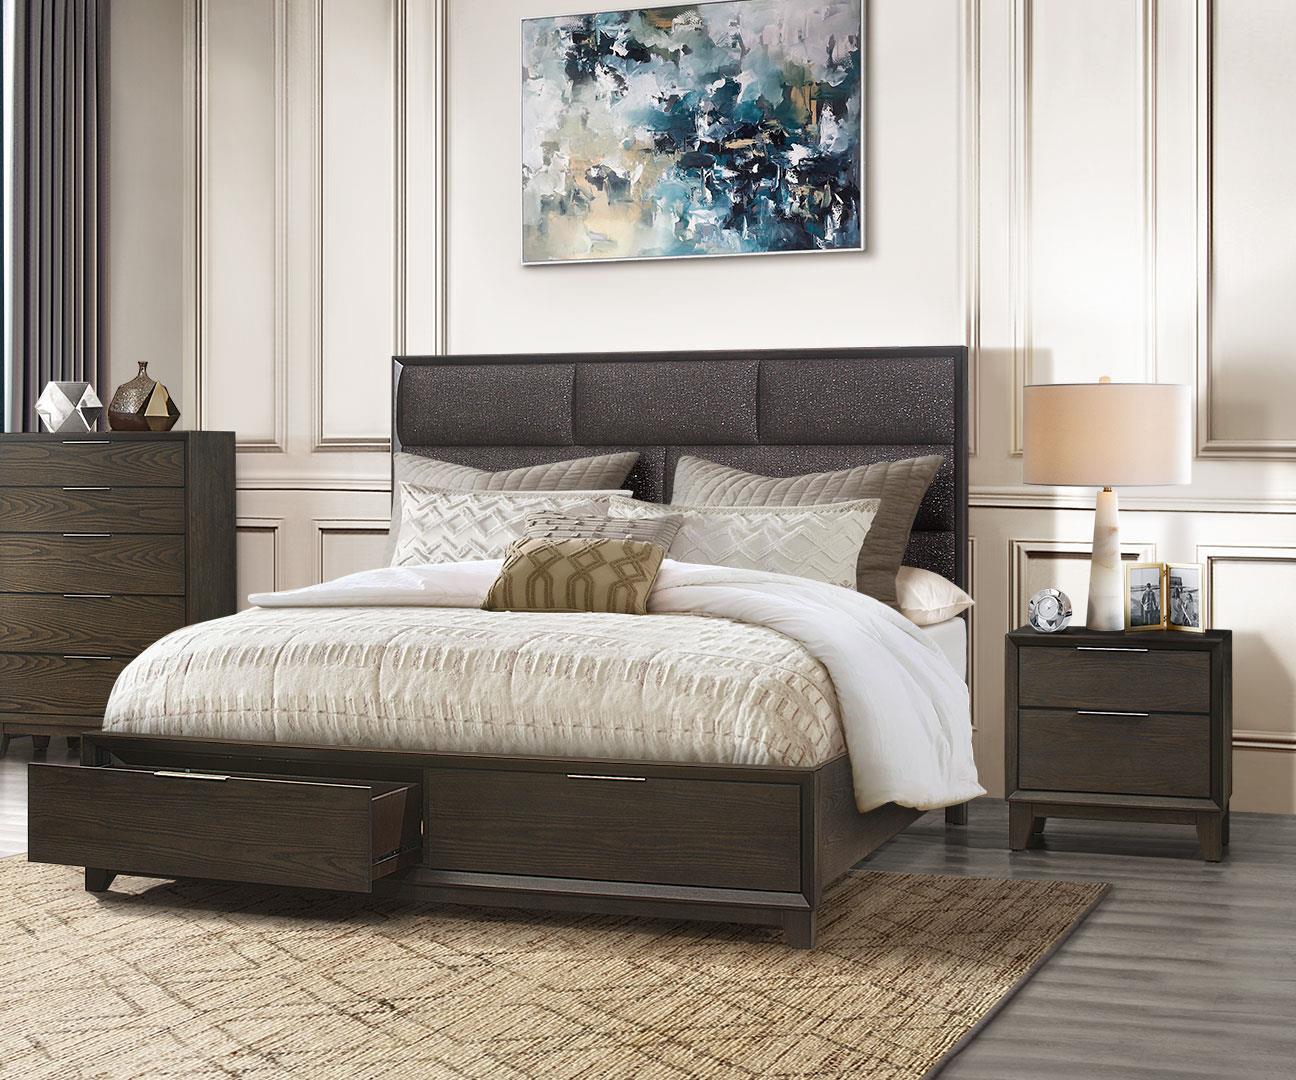 Contemporary Platform Bedroom Set WILLOW WILLOW-KB-Set-3 in Gray, Chocolate Fabric